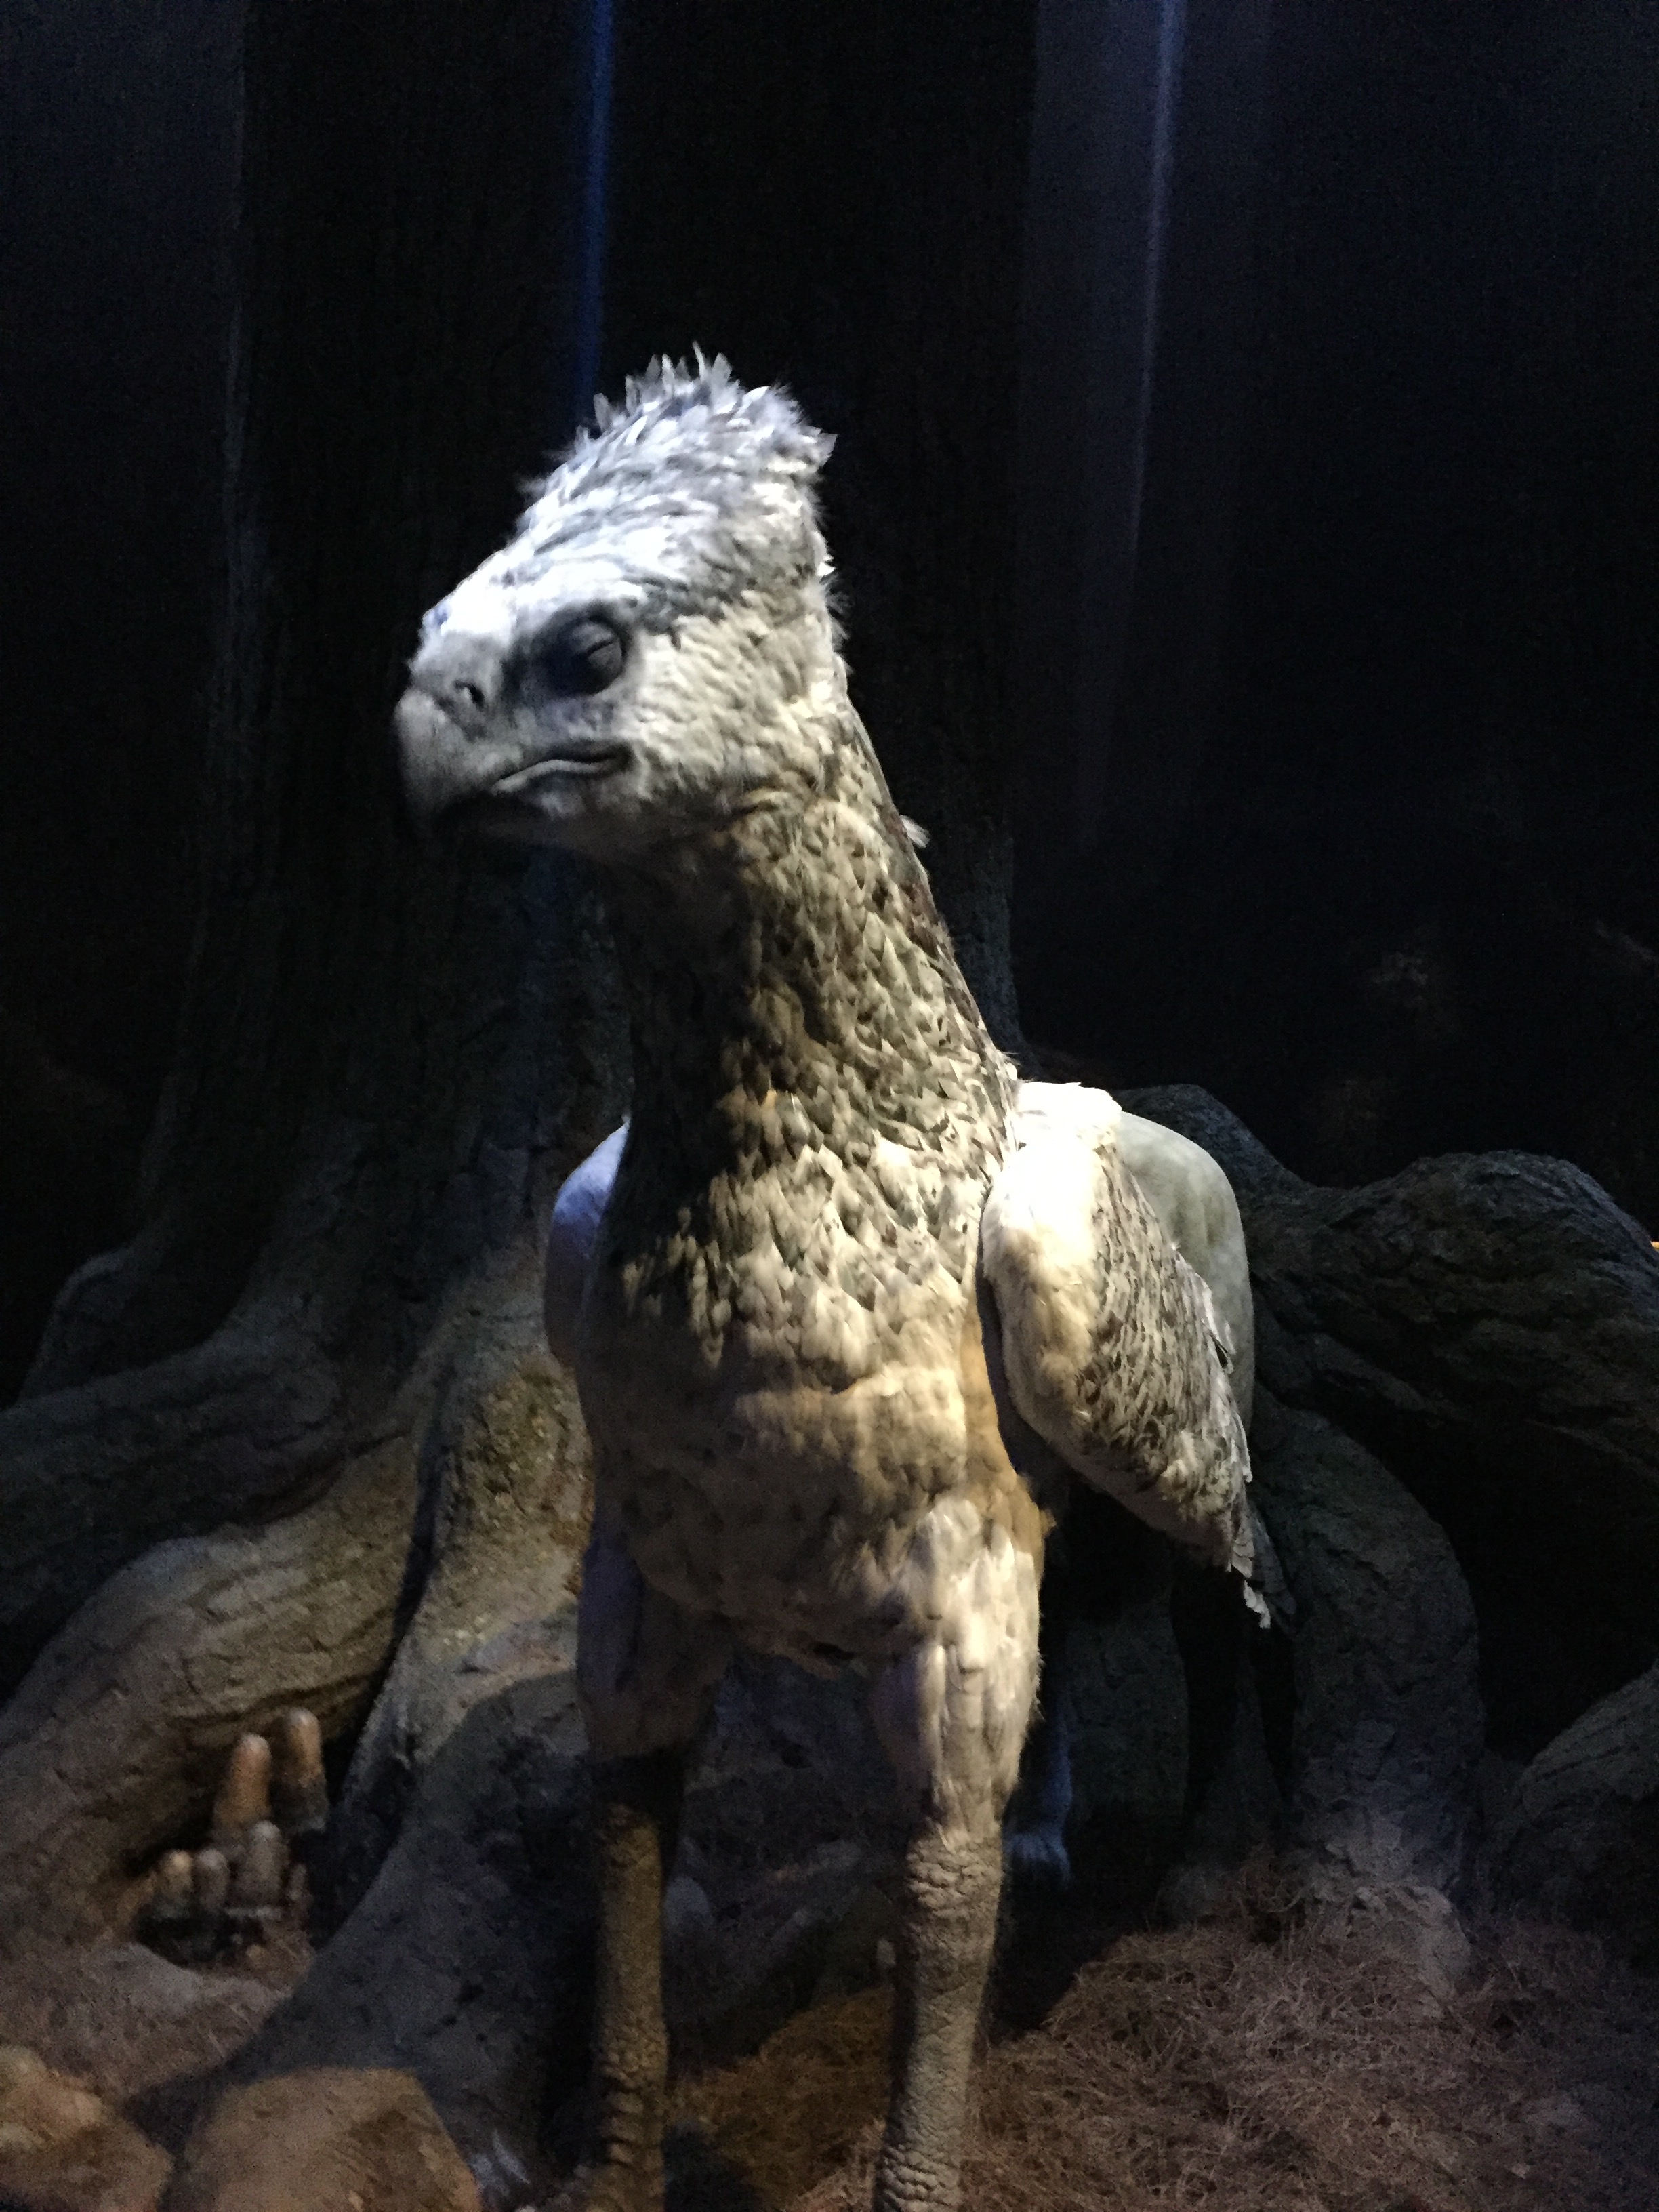 Lifesize model of Buckbeak the hippogriff from the Harry Potter films. He has the front legs, wings, and head of a giant eagle, with the body, hind legs and tail of a horse.